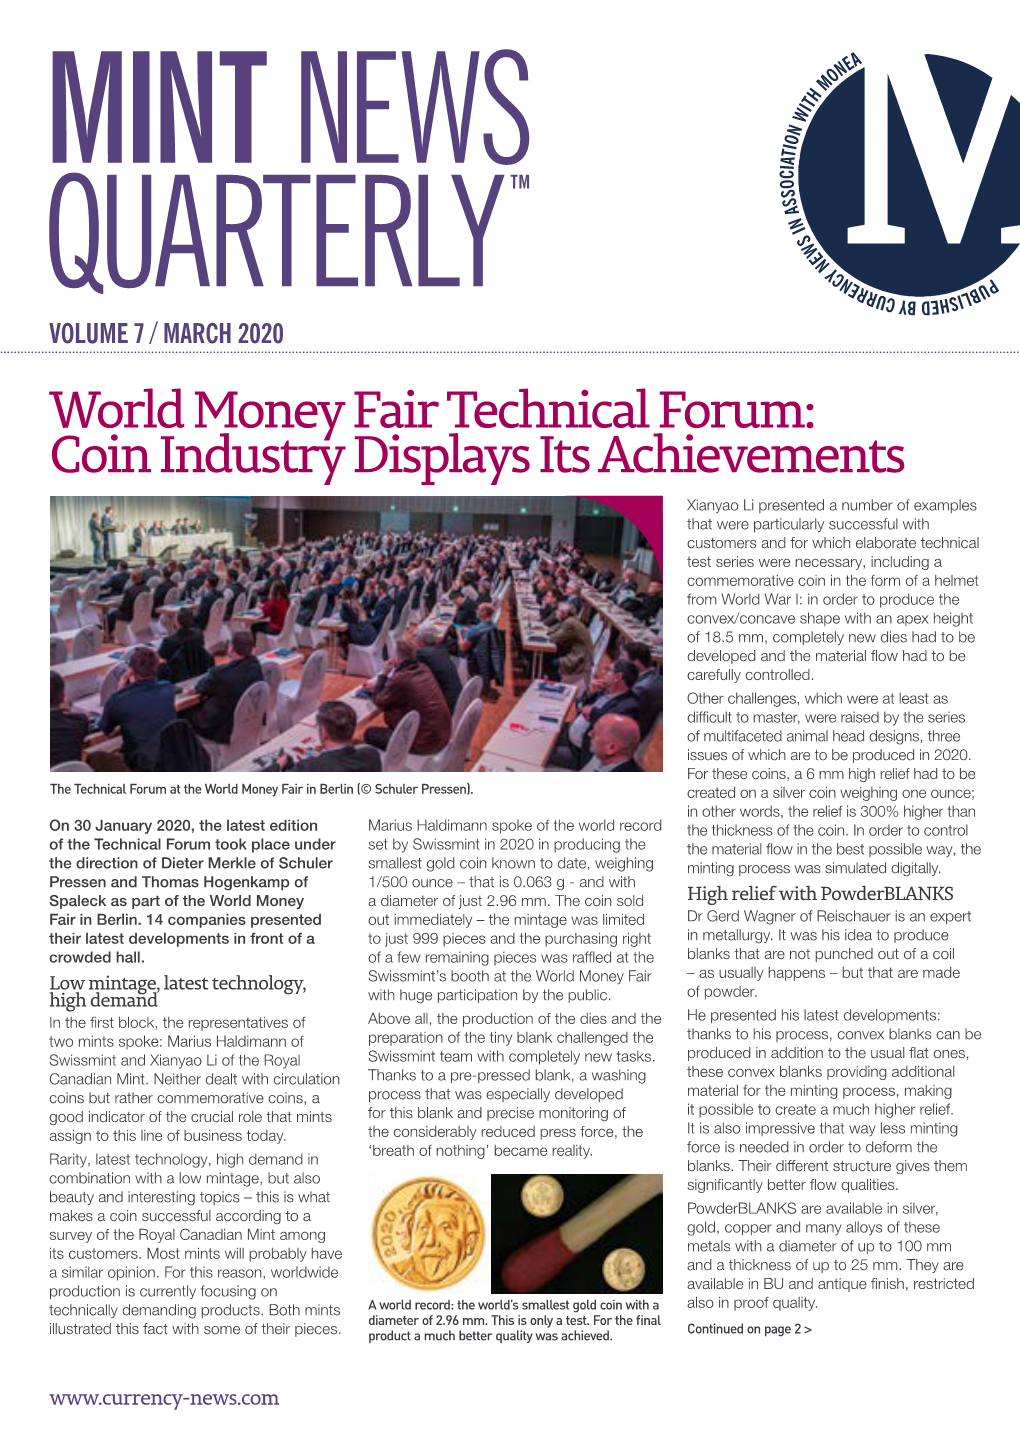 World Money Fair Technical Forum: Coin Industry Displays Its